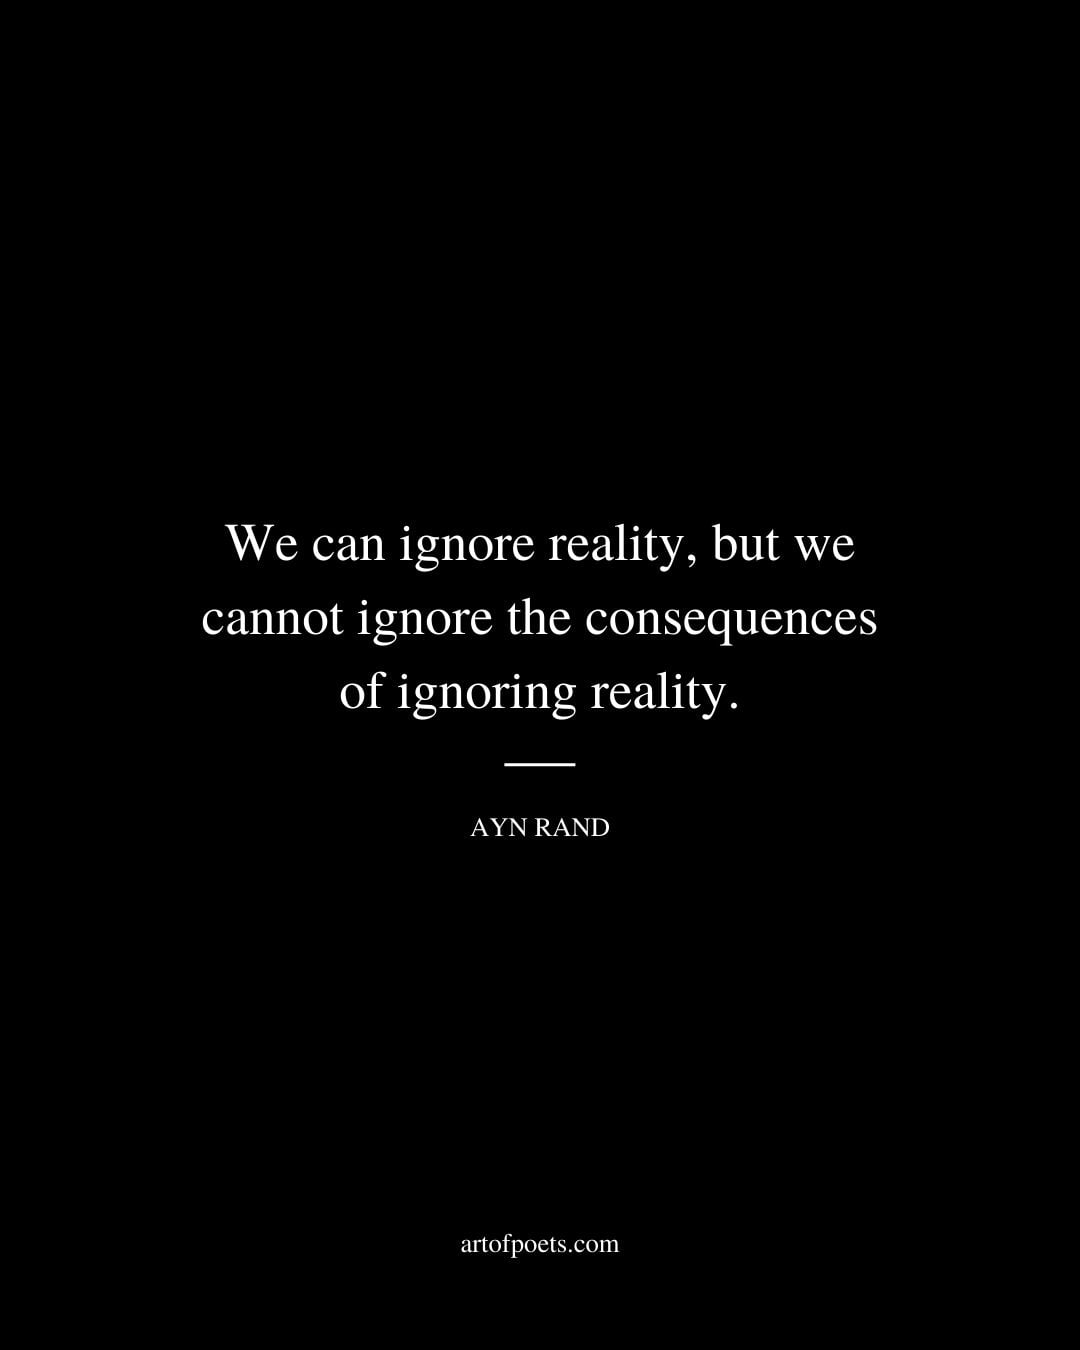 We can ignore reality but we cannot ignore the consequences of ignoring reality